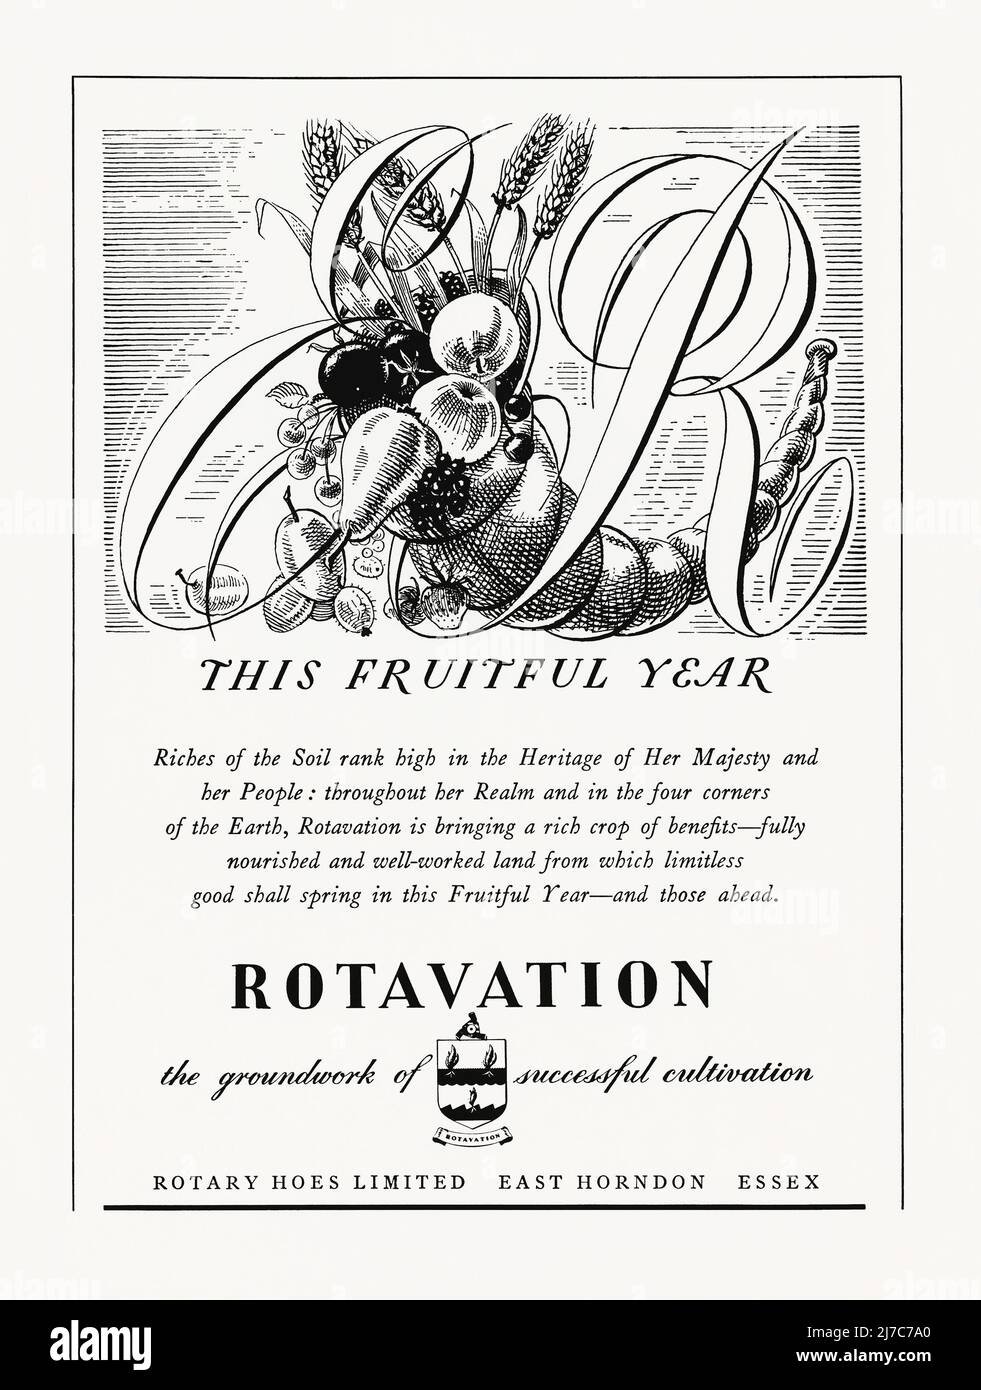 A 1953 advert for rotary hoe makers, Rotary Hoes Ltd. The advert appeared in a magazine published in the UK in June that year – the issue was a special edition, published to mark the coronation of Queen Elizabeth. The stylish line illustration, promoting rotavation in farming, shows fruit and cereal crops – marking ‘A Fruitful Year’ – wrapped around the letters ‘ER’ (Elizabeth Regina). The powered rotary hoe was invented by Arthur Clifford Howard who, in 1912, experimented with rotary tillage in Gilgandra, NSW, Australia using a steam tractor engine – vintage 1950s graphics for editorial use. Stock Photo